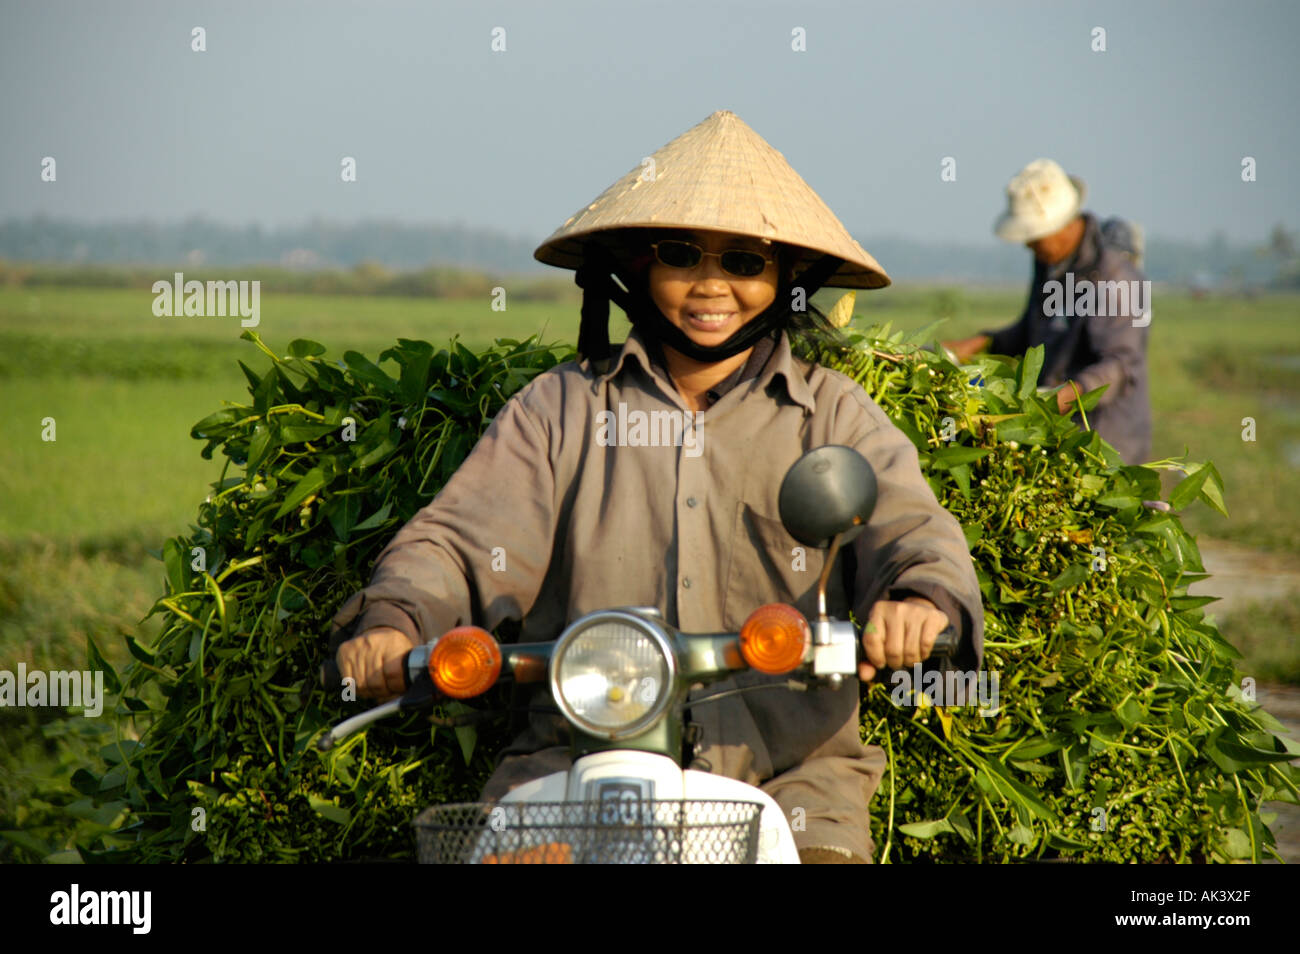 Woman wearing a cone shaped hat riding her motorbike loaded with vegetables Hoi An Vietnam Stock Photo